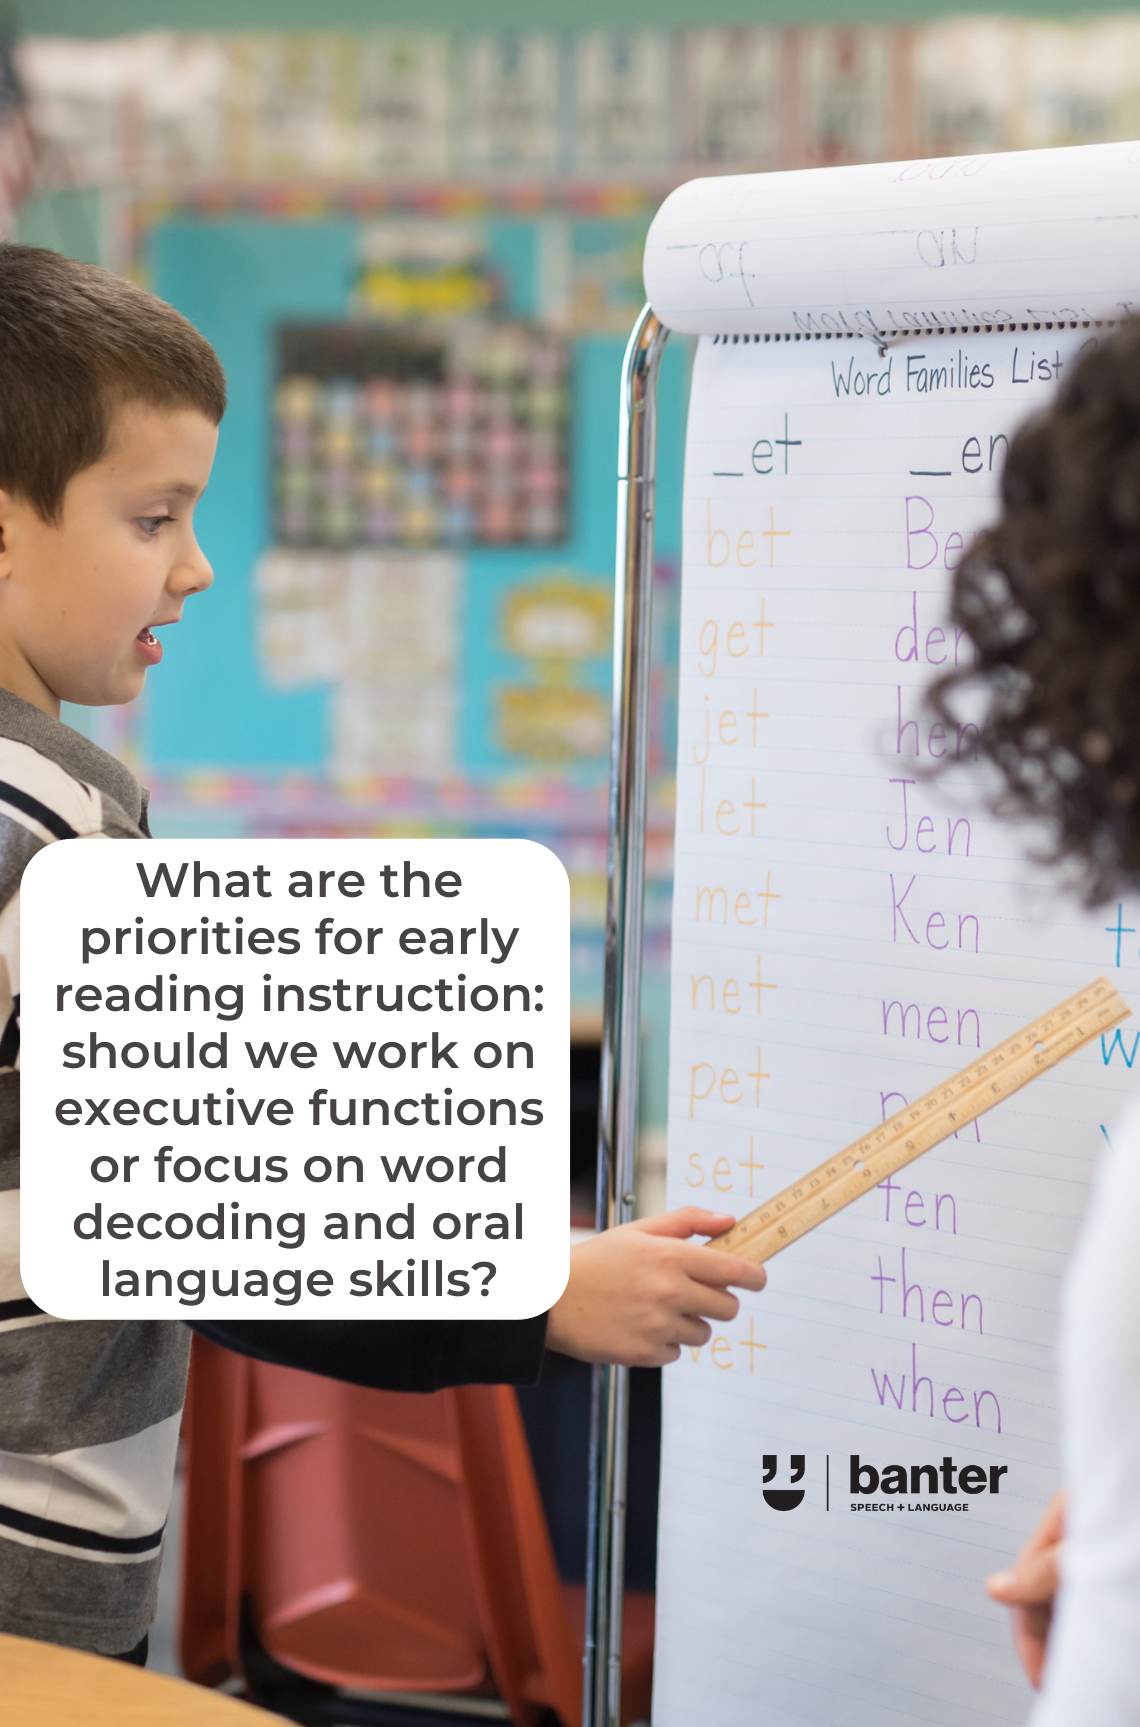 What are the priorities for early reading instruction should we work on executive functions or focus on word decoding and oral language skills